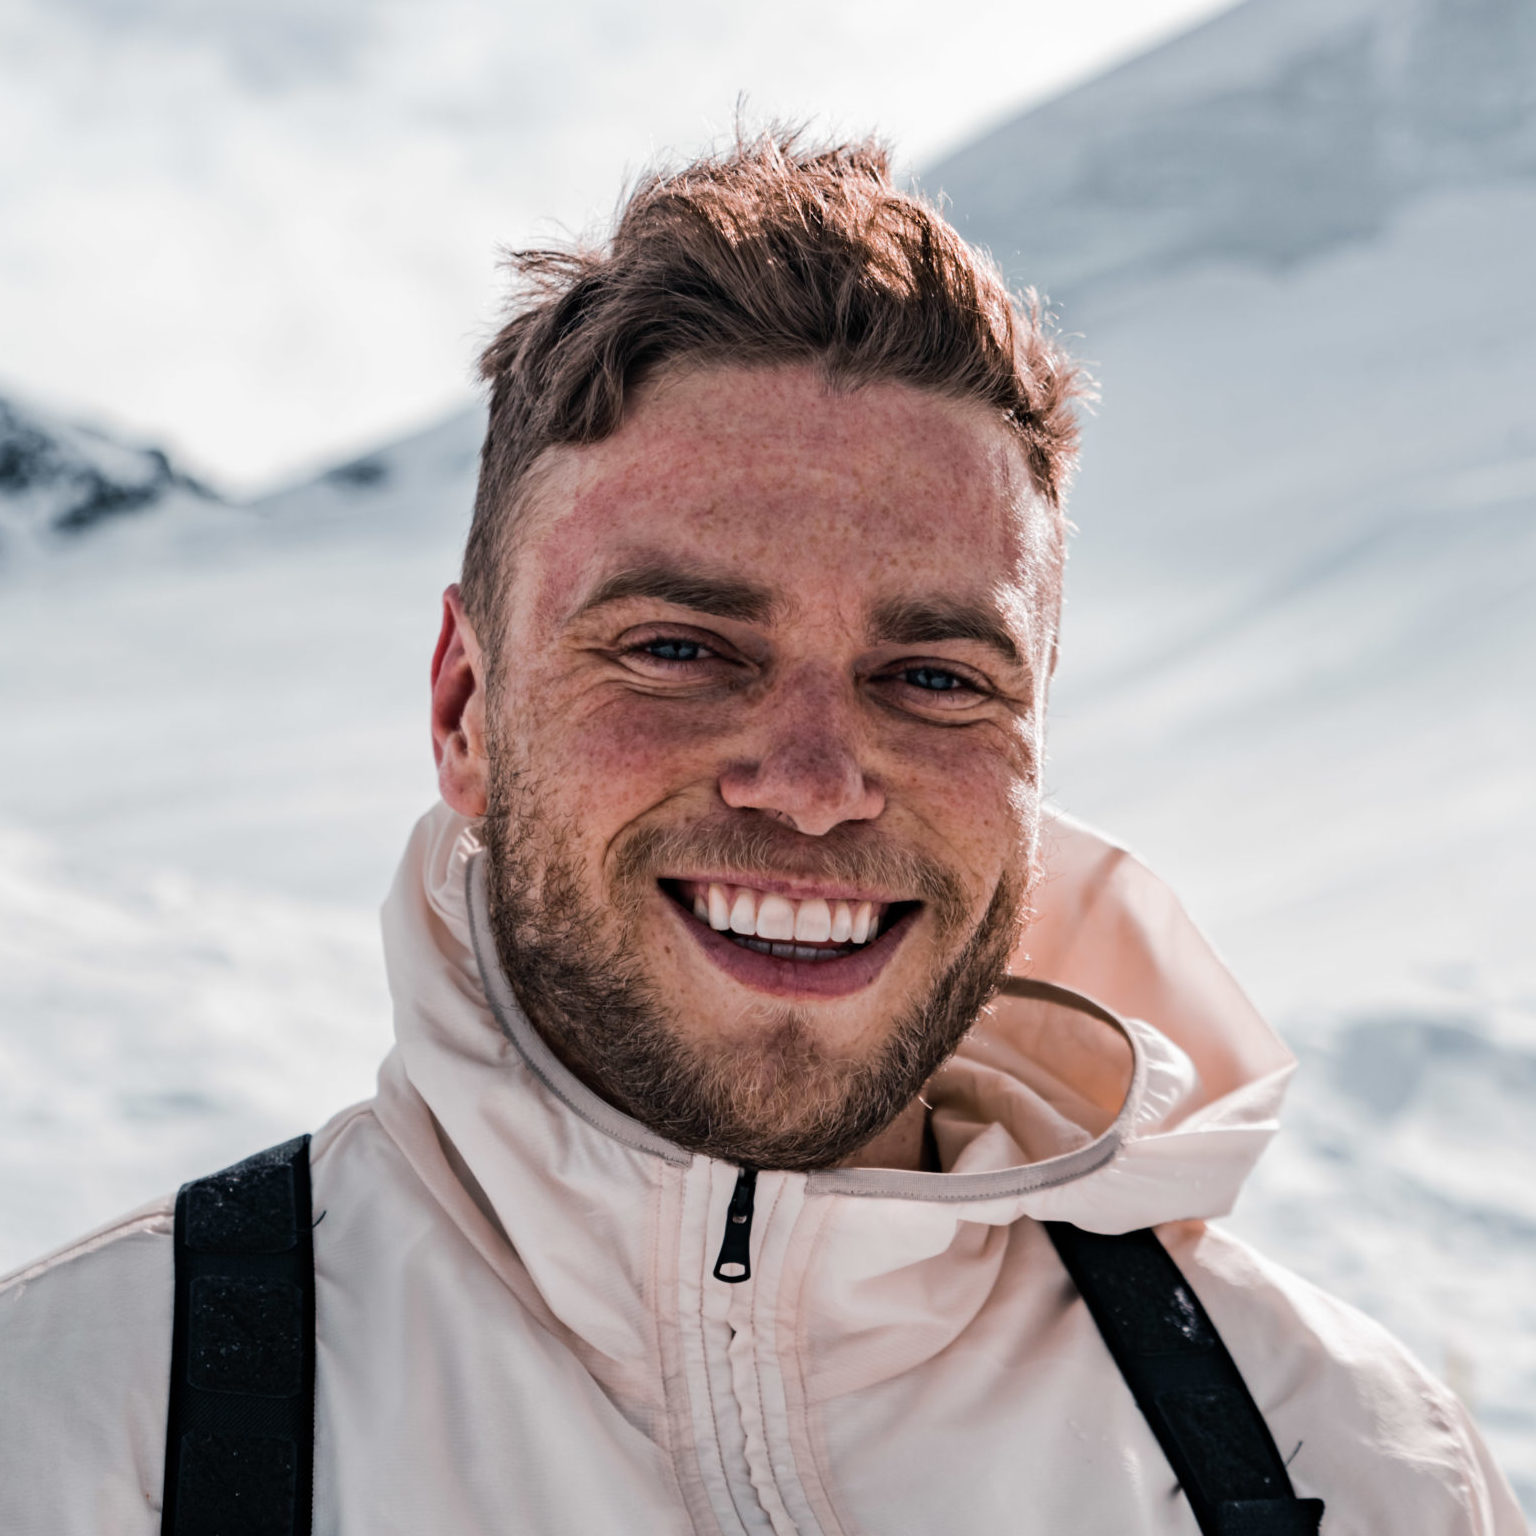 “My mom is so proud and excited to see me compete at the Olympics for Britain” – Gus Kenworthy